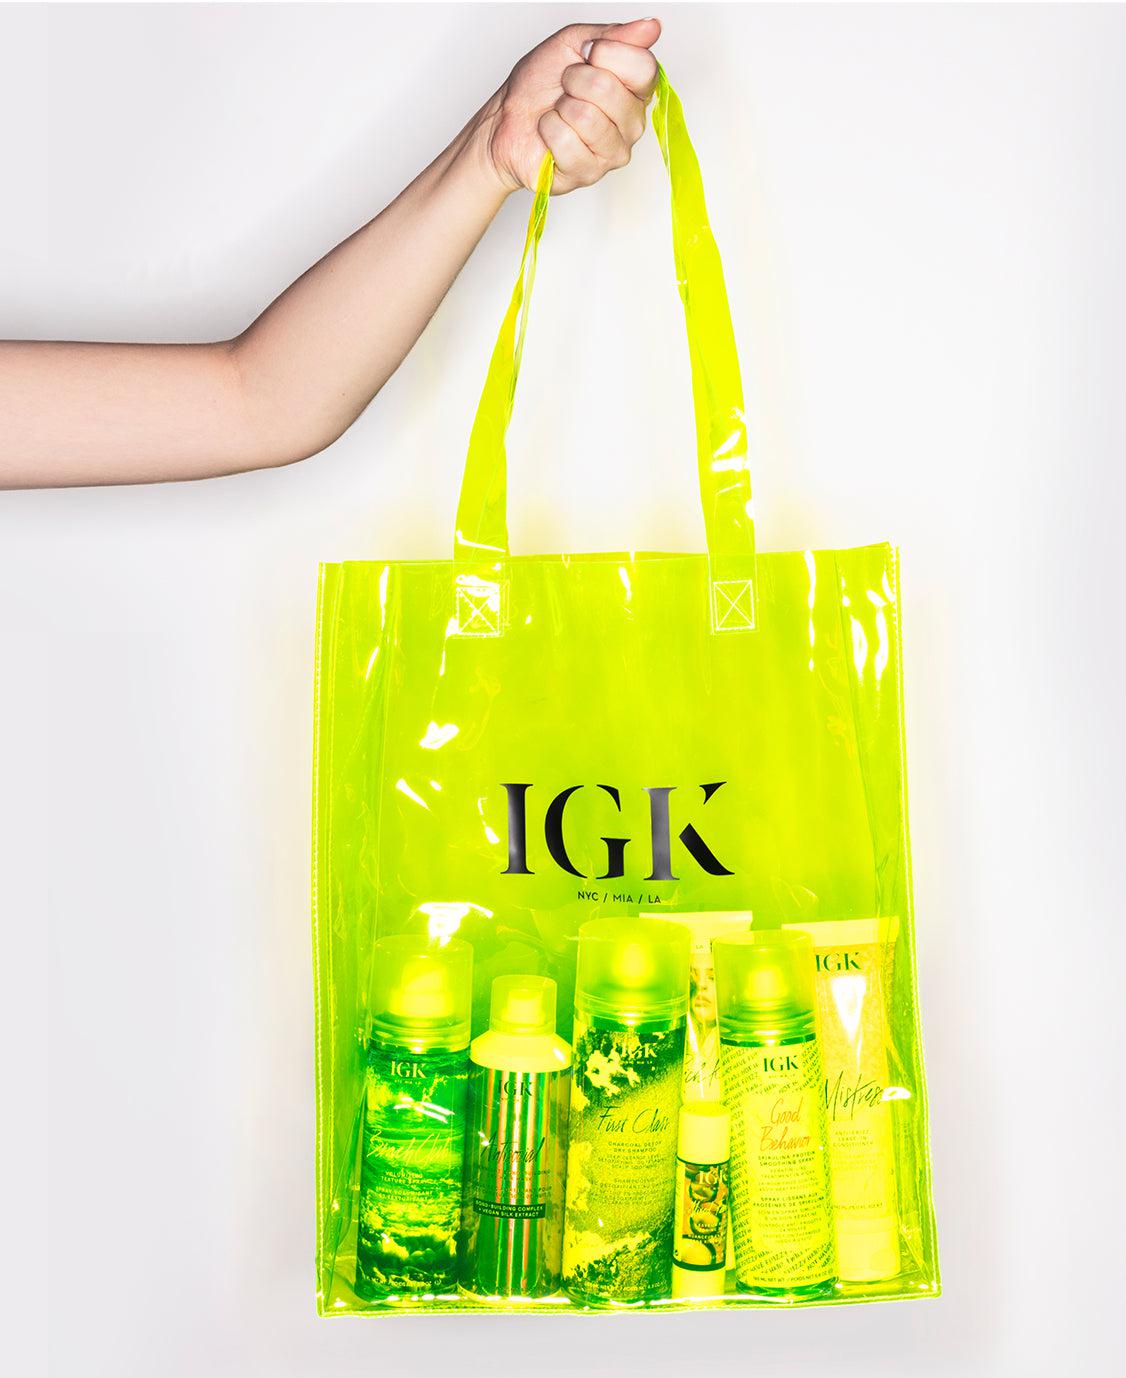 a hand holding a yellow bag with bottles in it